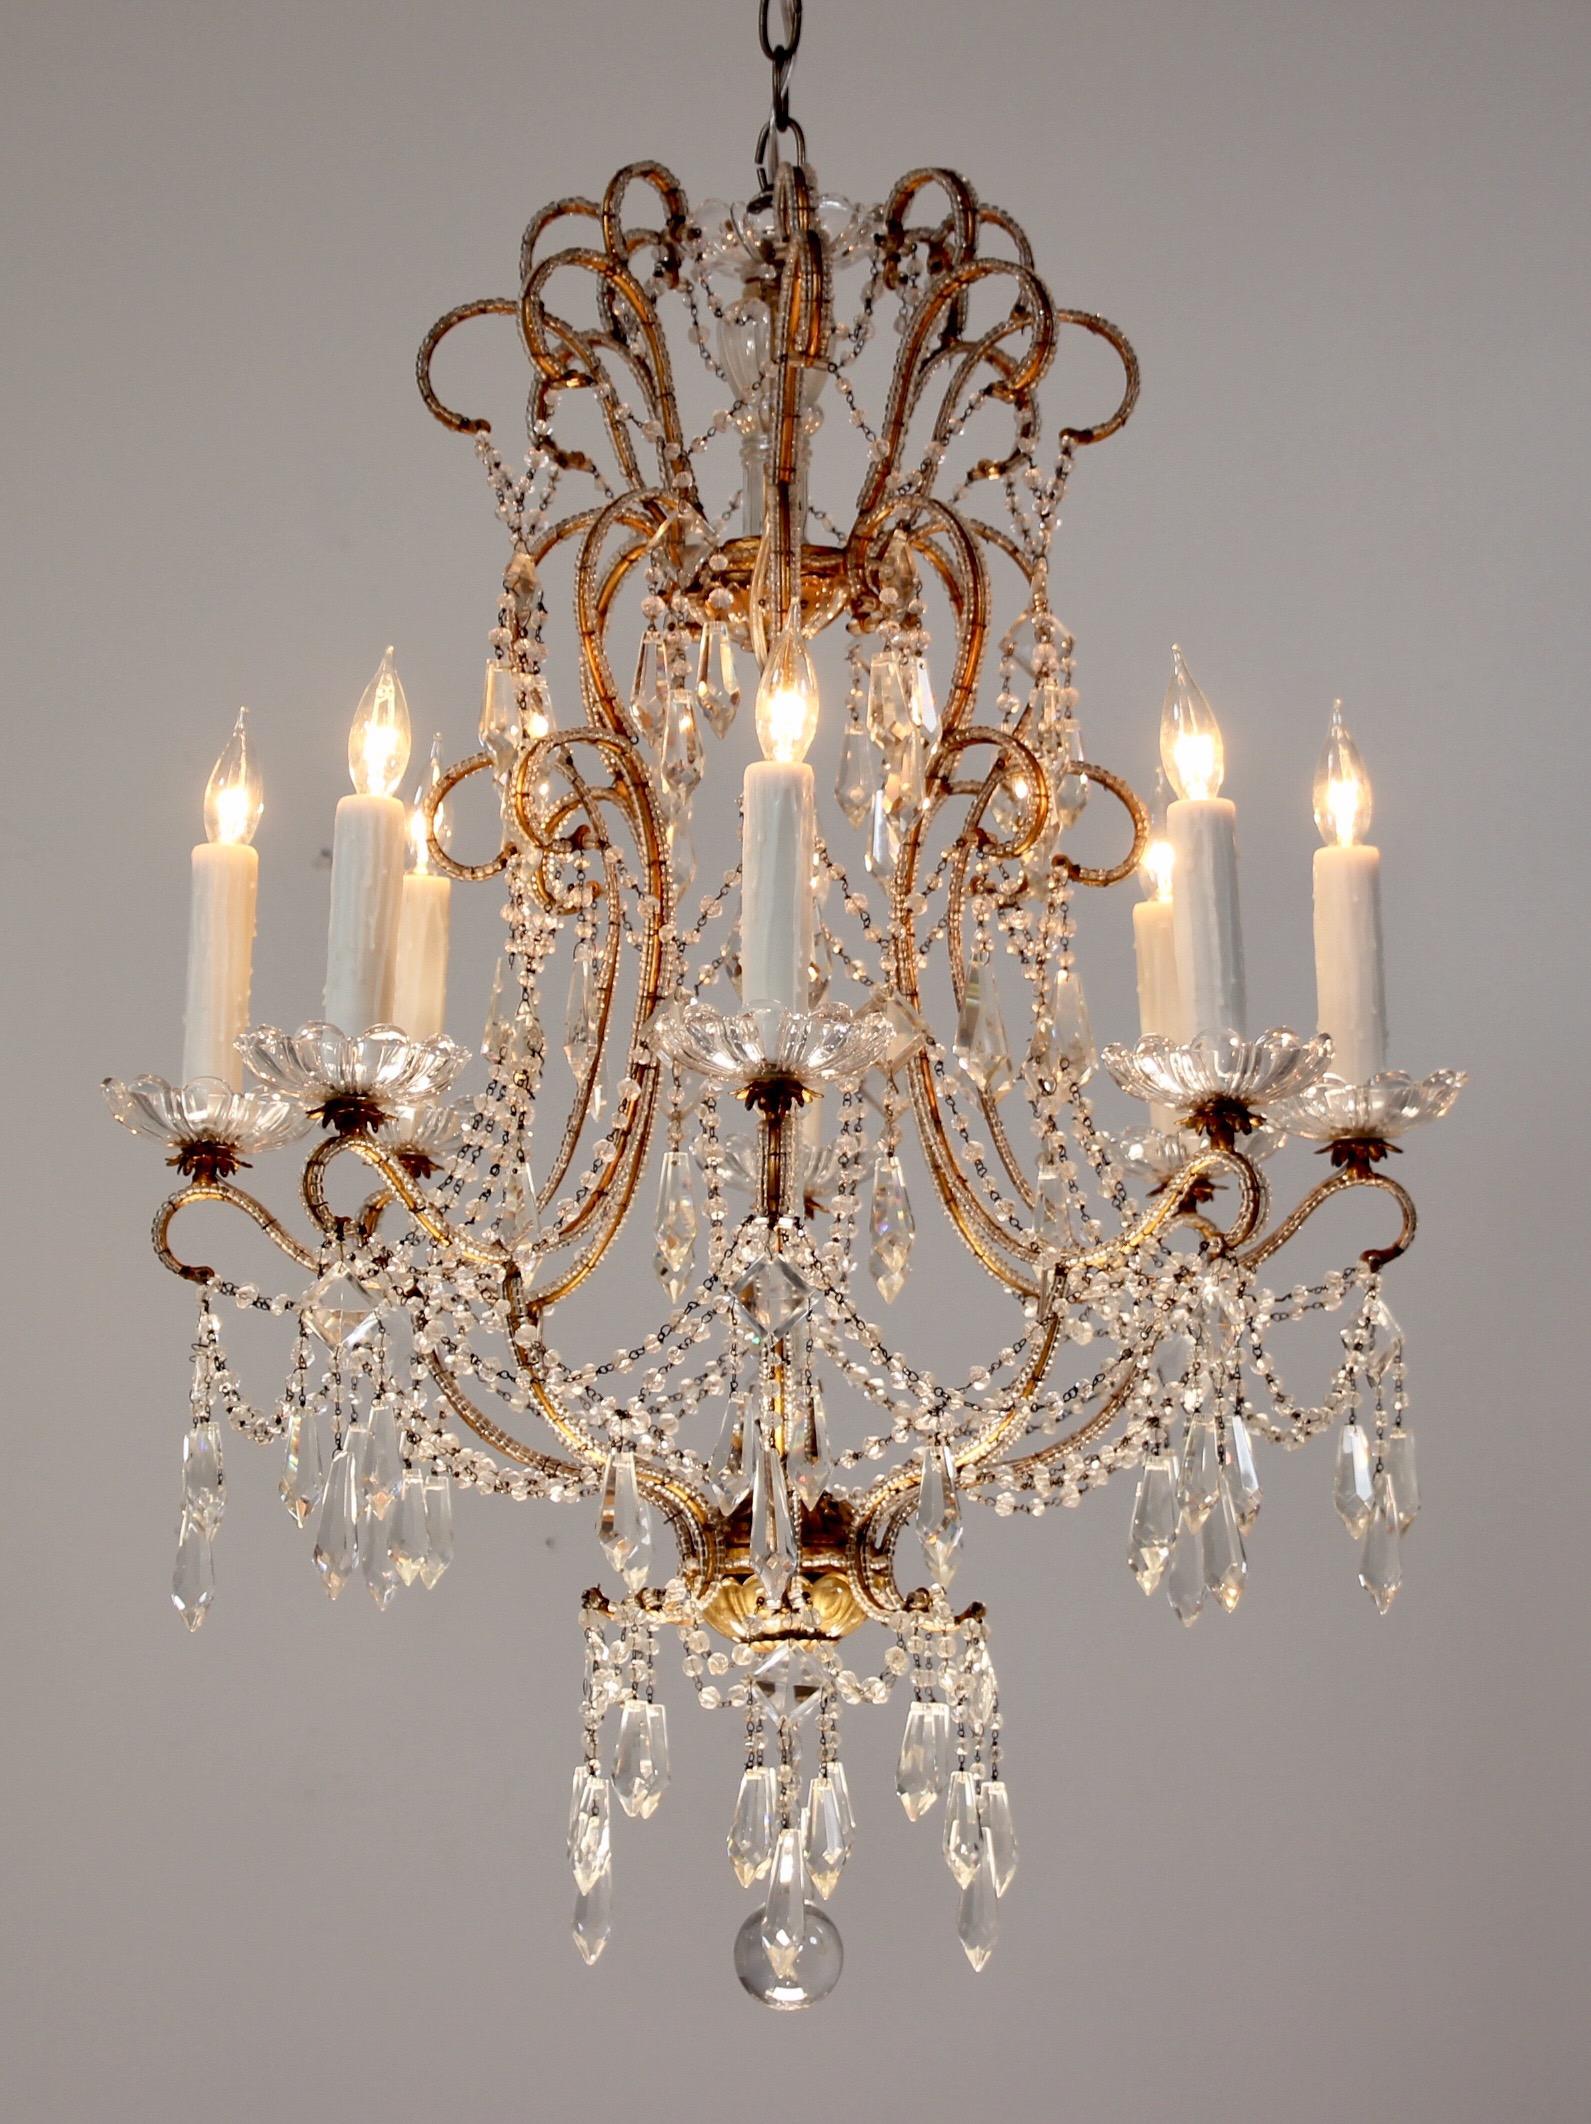 Gorgeous, 1940s Italian beaded chandelier featuring an elegantly scrolled gilt-iron frame which has been hand-beaded throughout its entirety. Note the delicate scalloped bobeches, bead garlands and sparkling crystal prisms.

This graceful chandelier